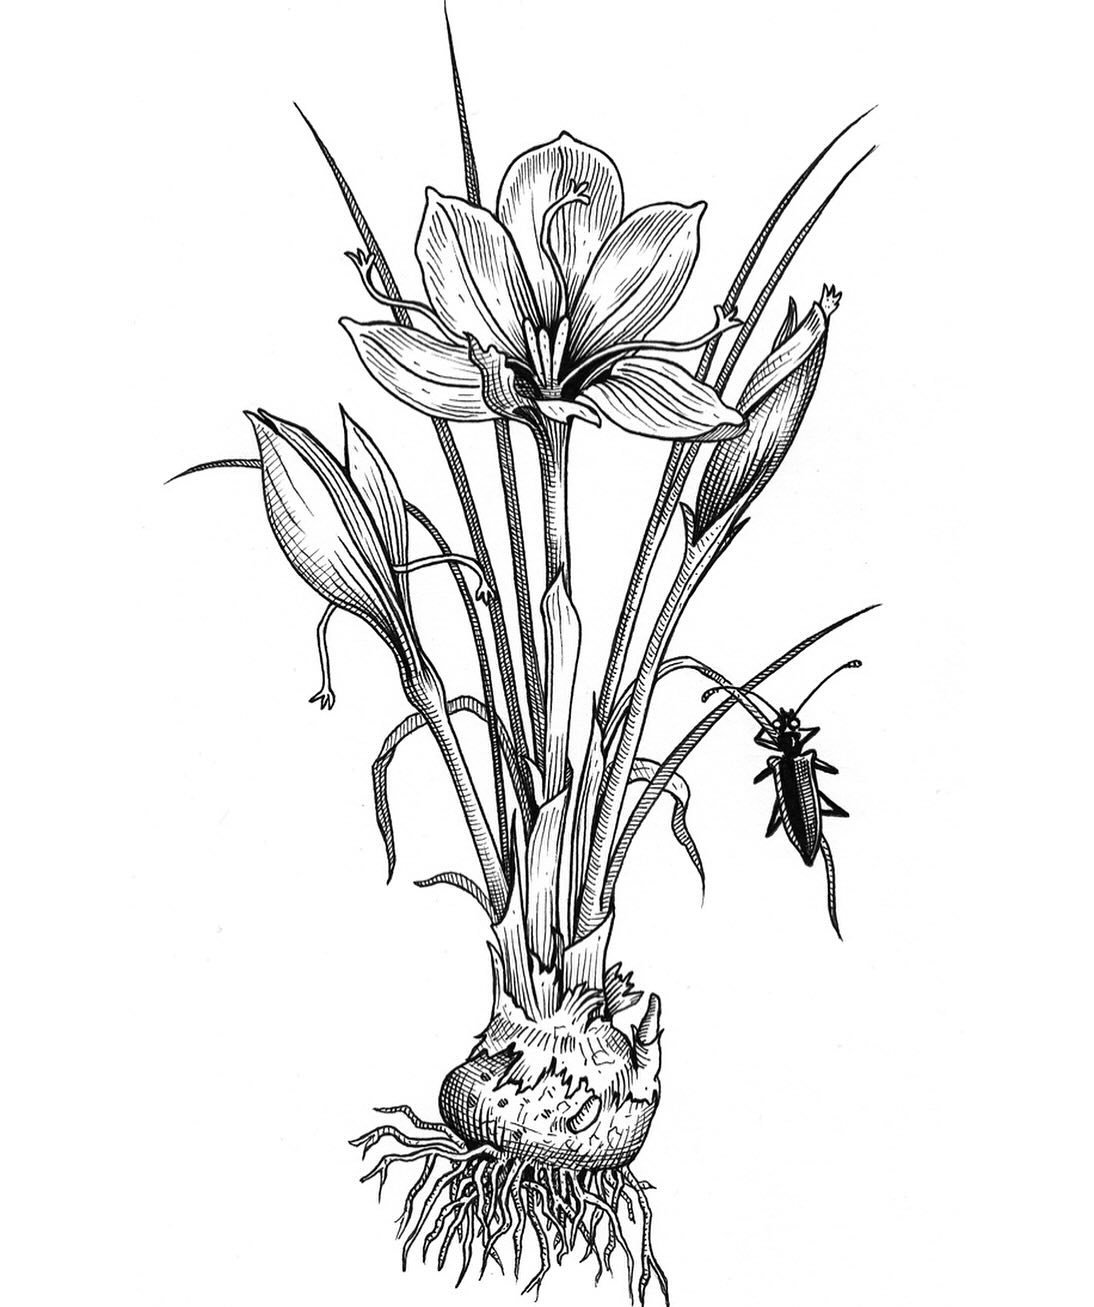 ᛭
Crocus sativus ~ Saffron 
Pen &amp; ink on paper 
Original illustration from The Green Mysteries 
2015 
᛭
&ldquo;In the cloistered laboratories of the European alchemists, the plant was known as Salefur. The eponymous compound Safranal, extracted f